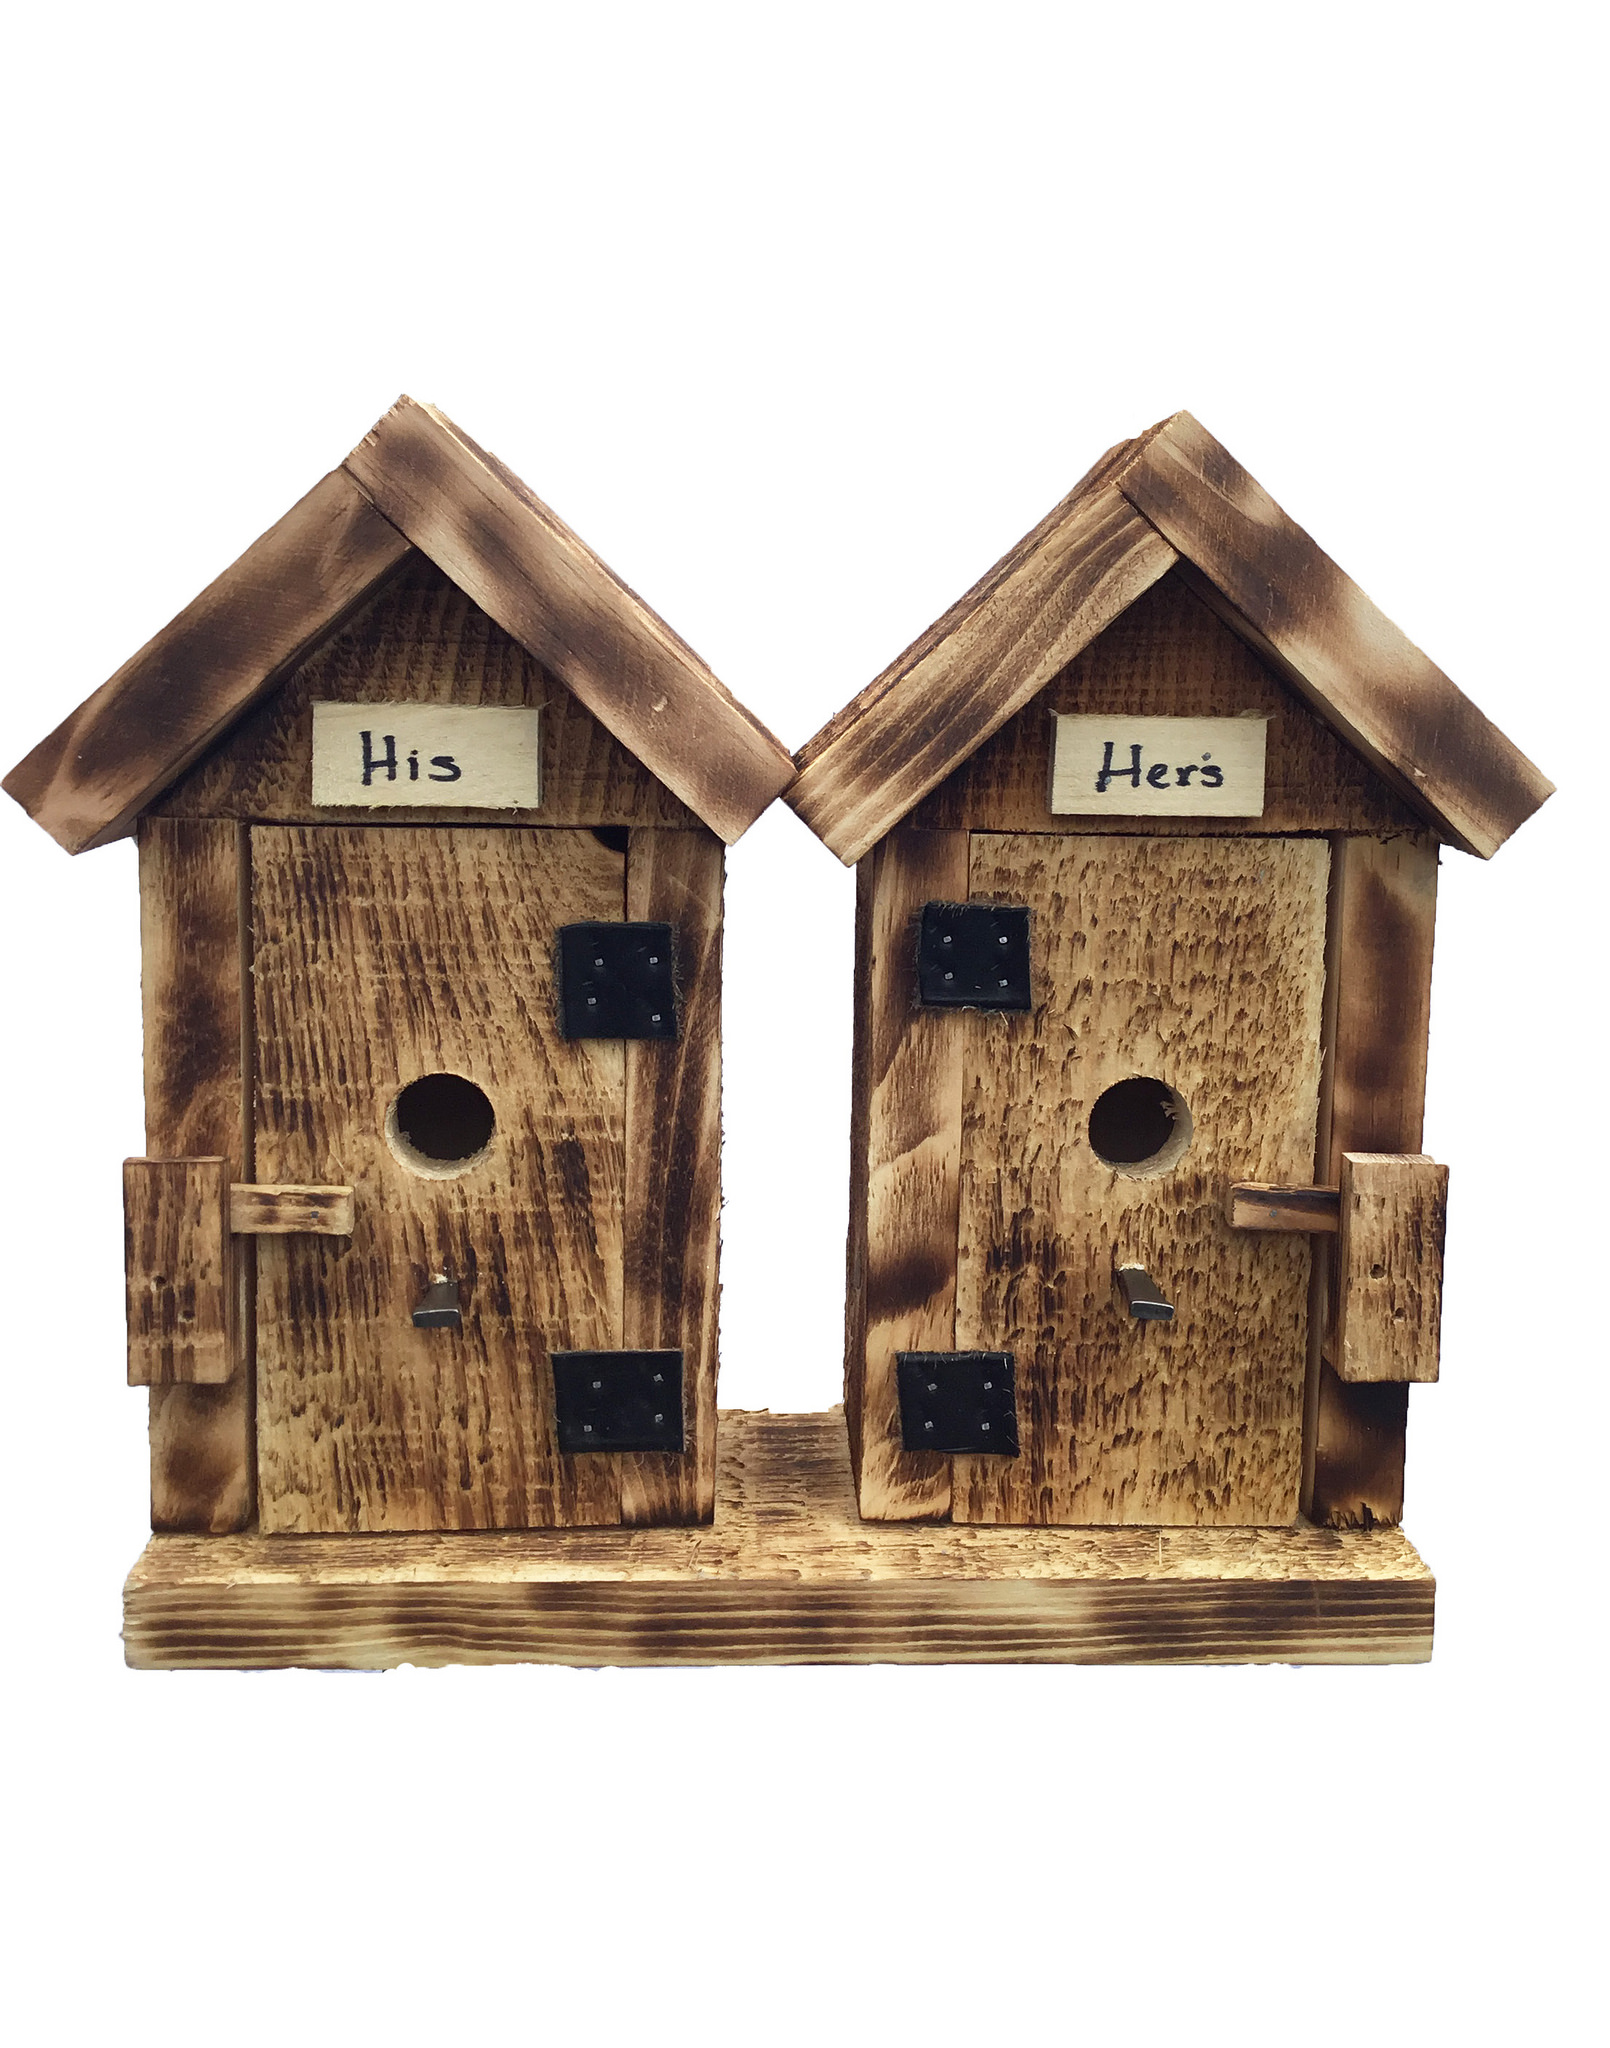 Burnt Pine His and Hers Bird Houses - image 1 of 2